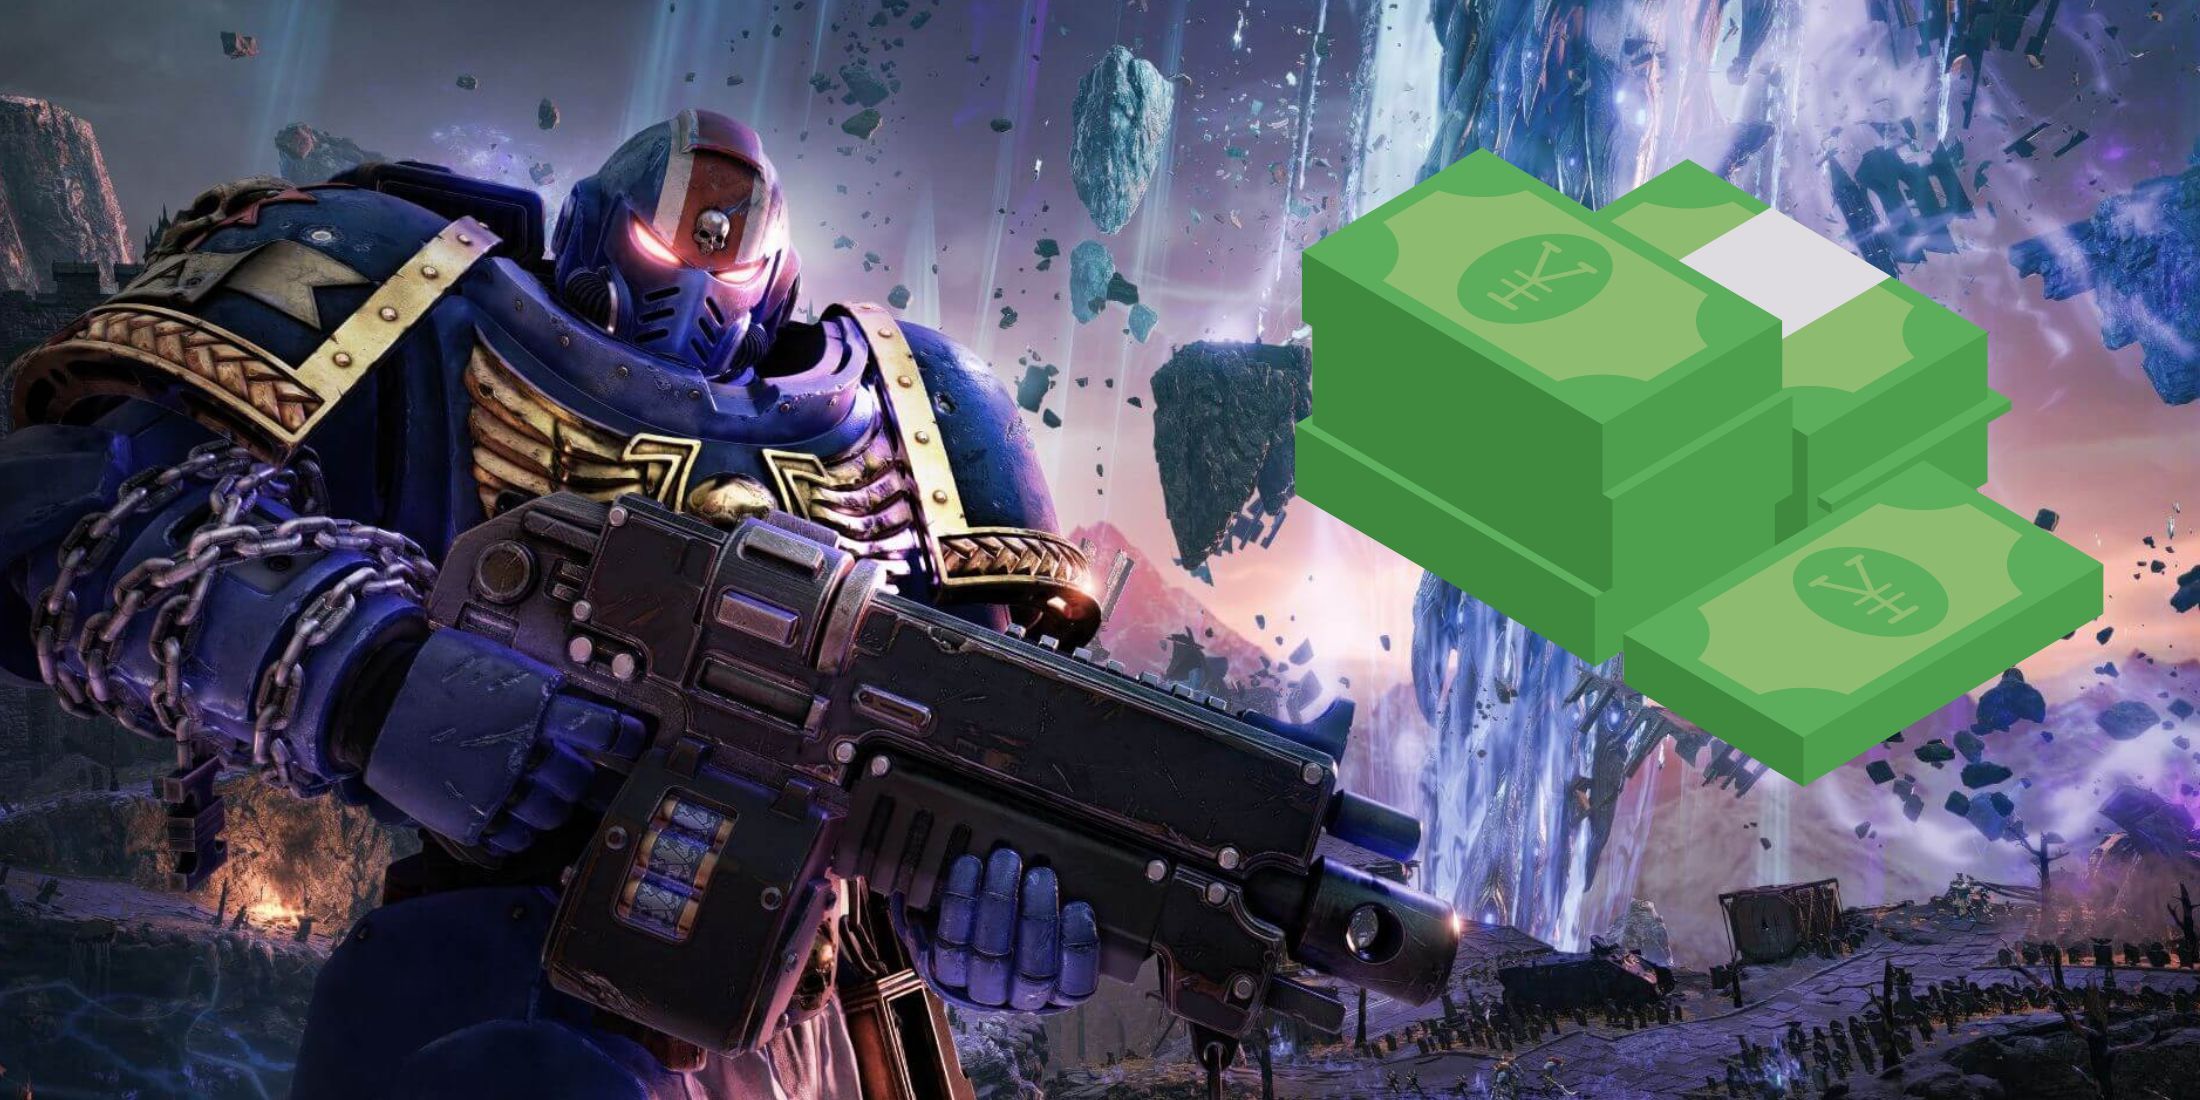 A Warhammer Space Marine next to a cartoonish pile of cash.